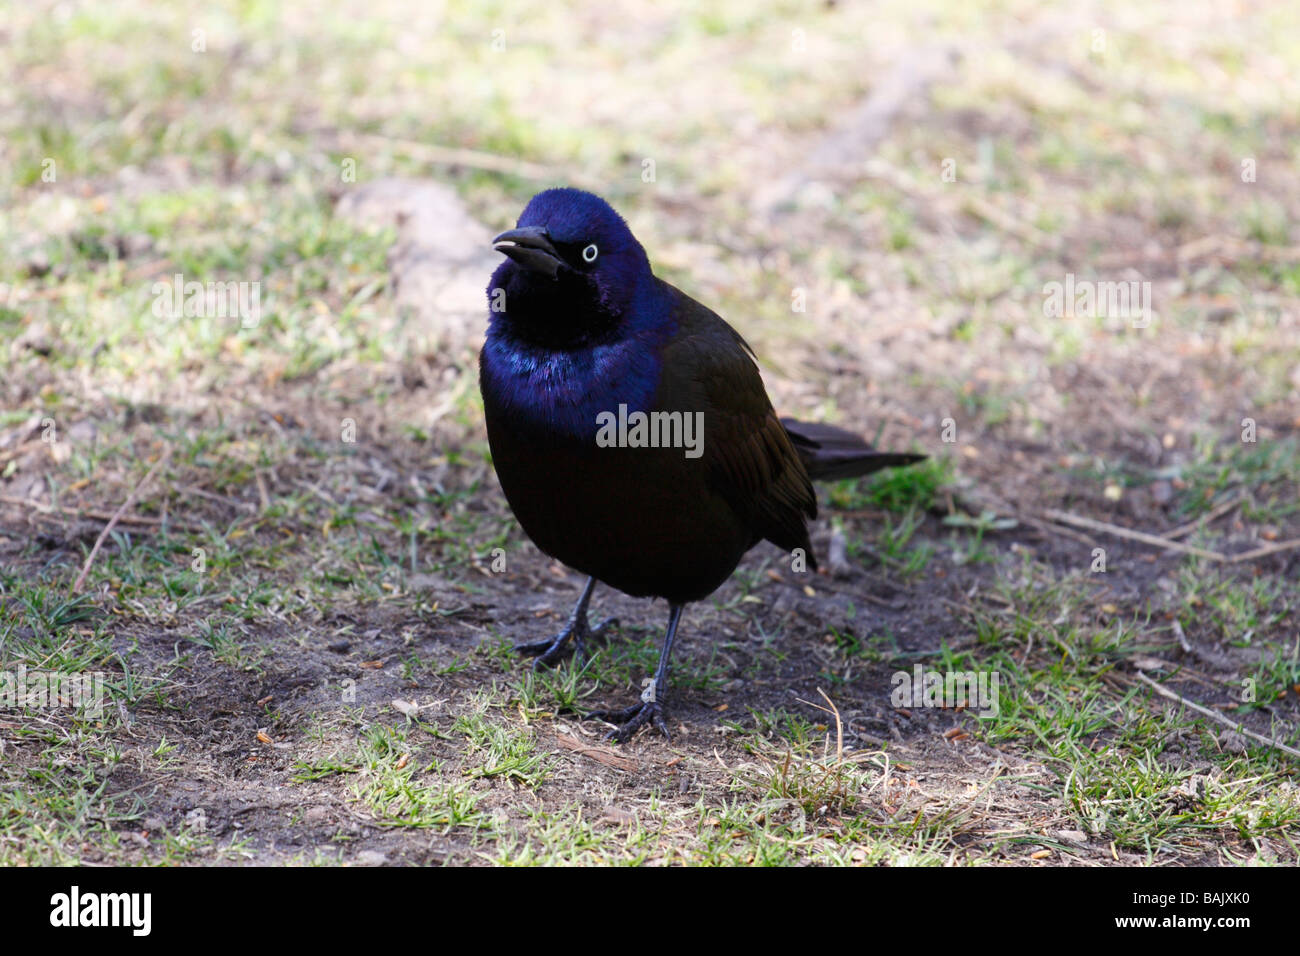 Common Grackle (Quiscalus quiscula). Stock Photo